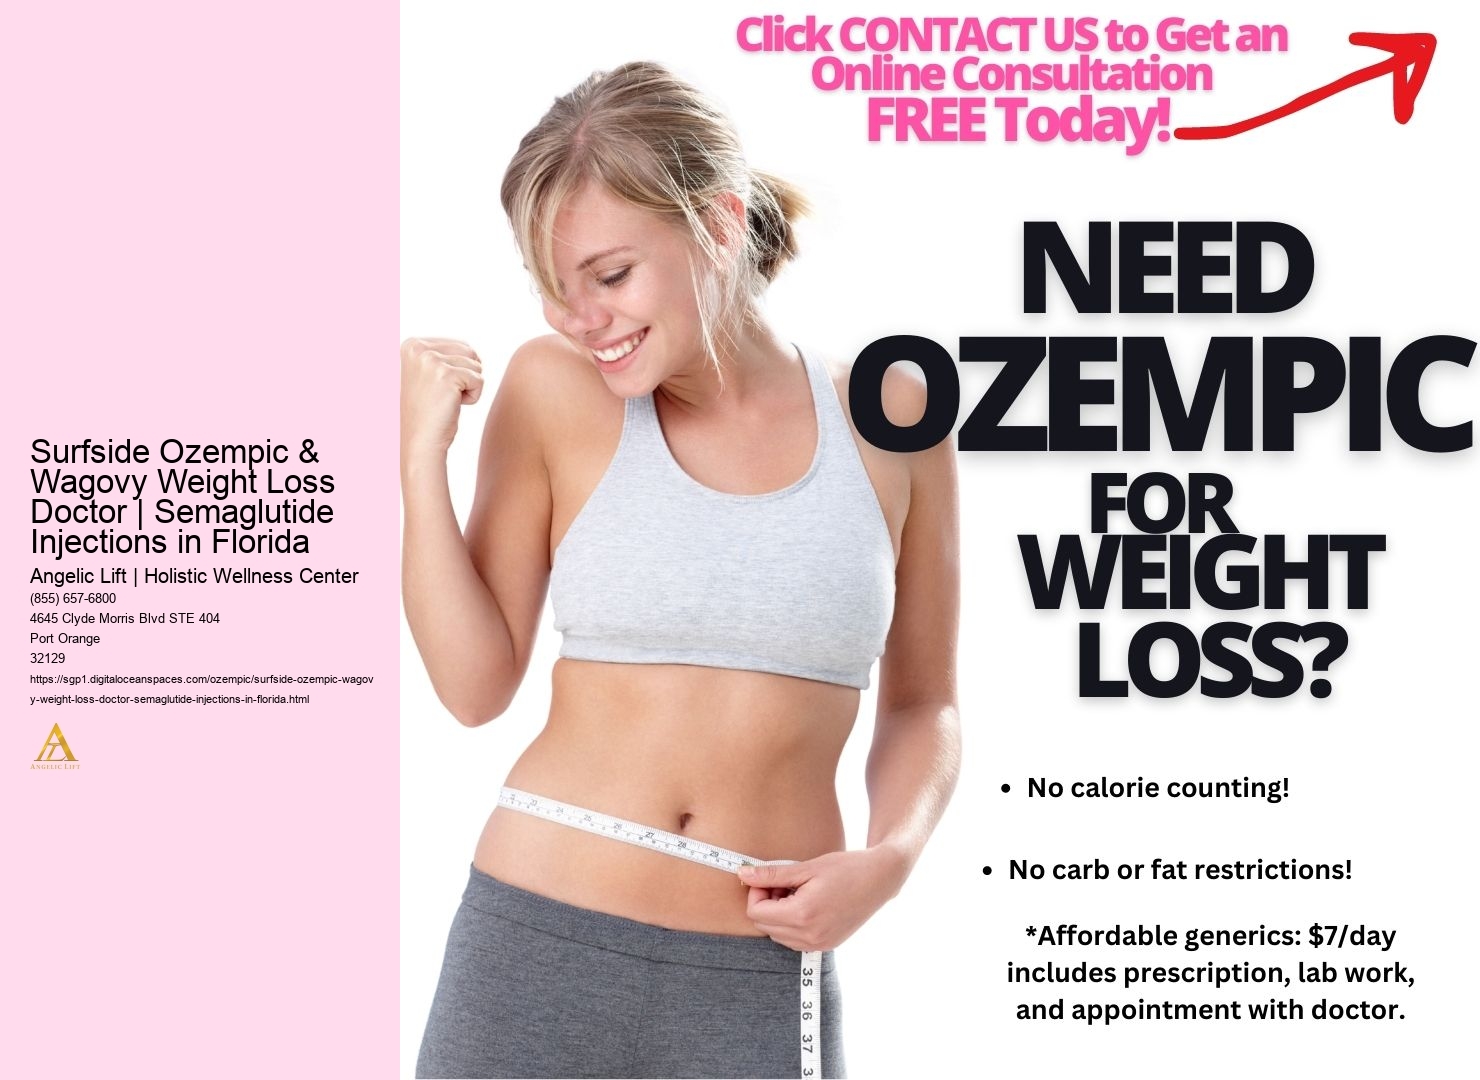 Surfside Ozempic & Wagovy Weight Loss Doctor | Semaglutide Injections in Florida